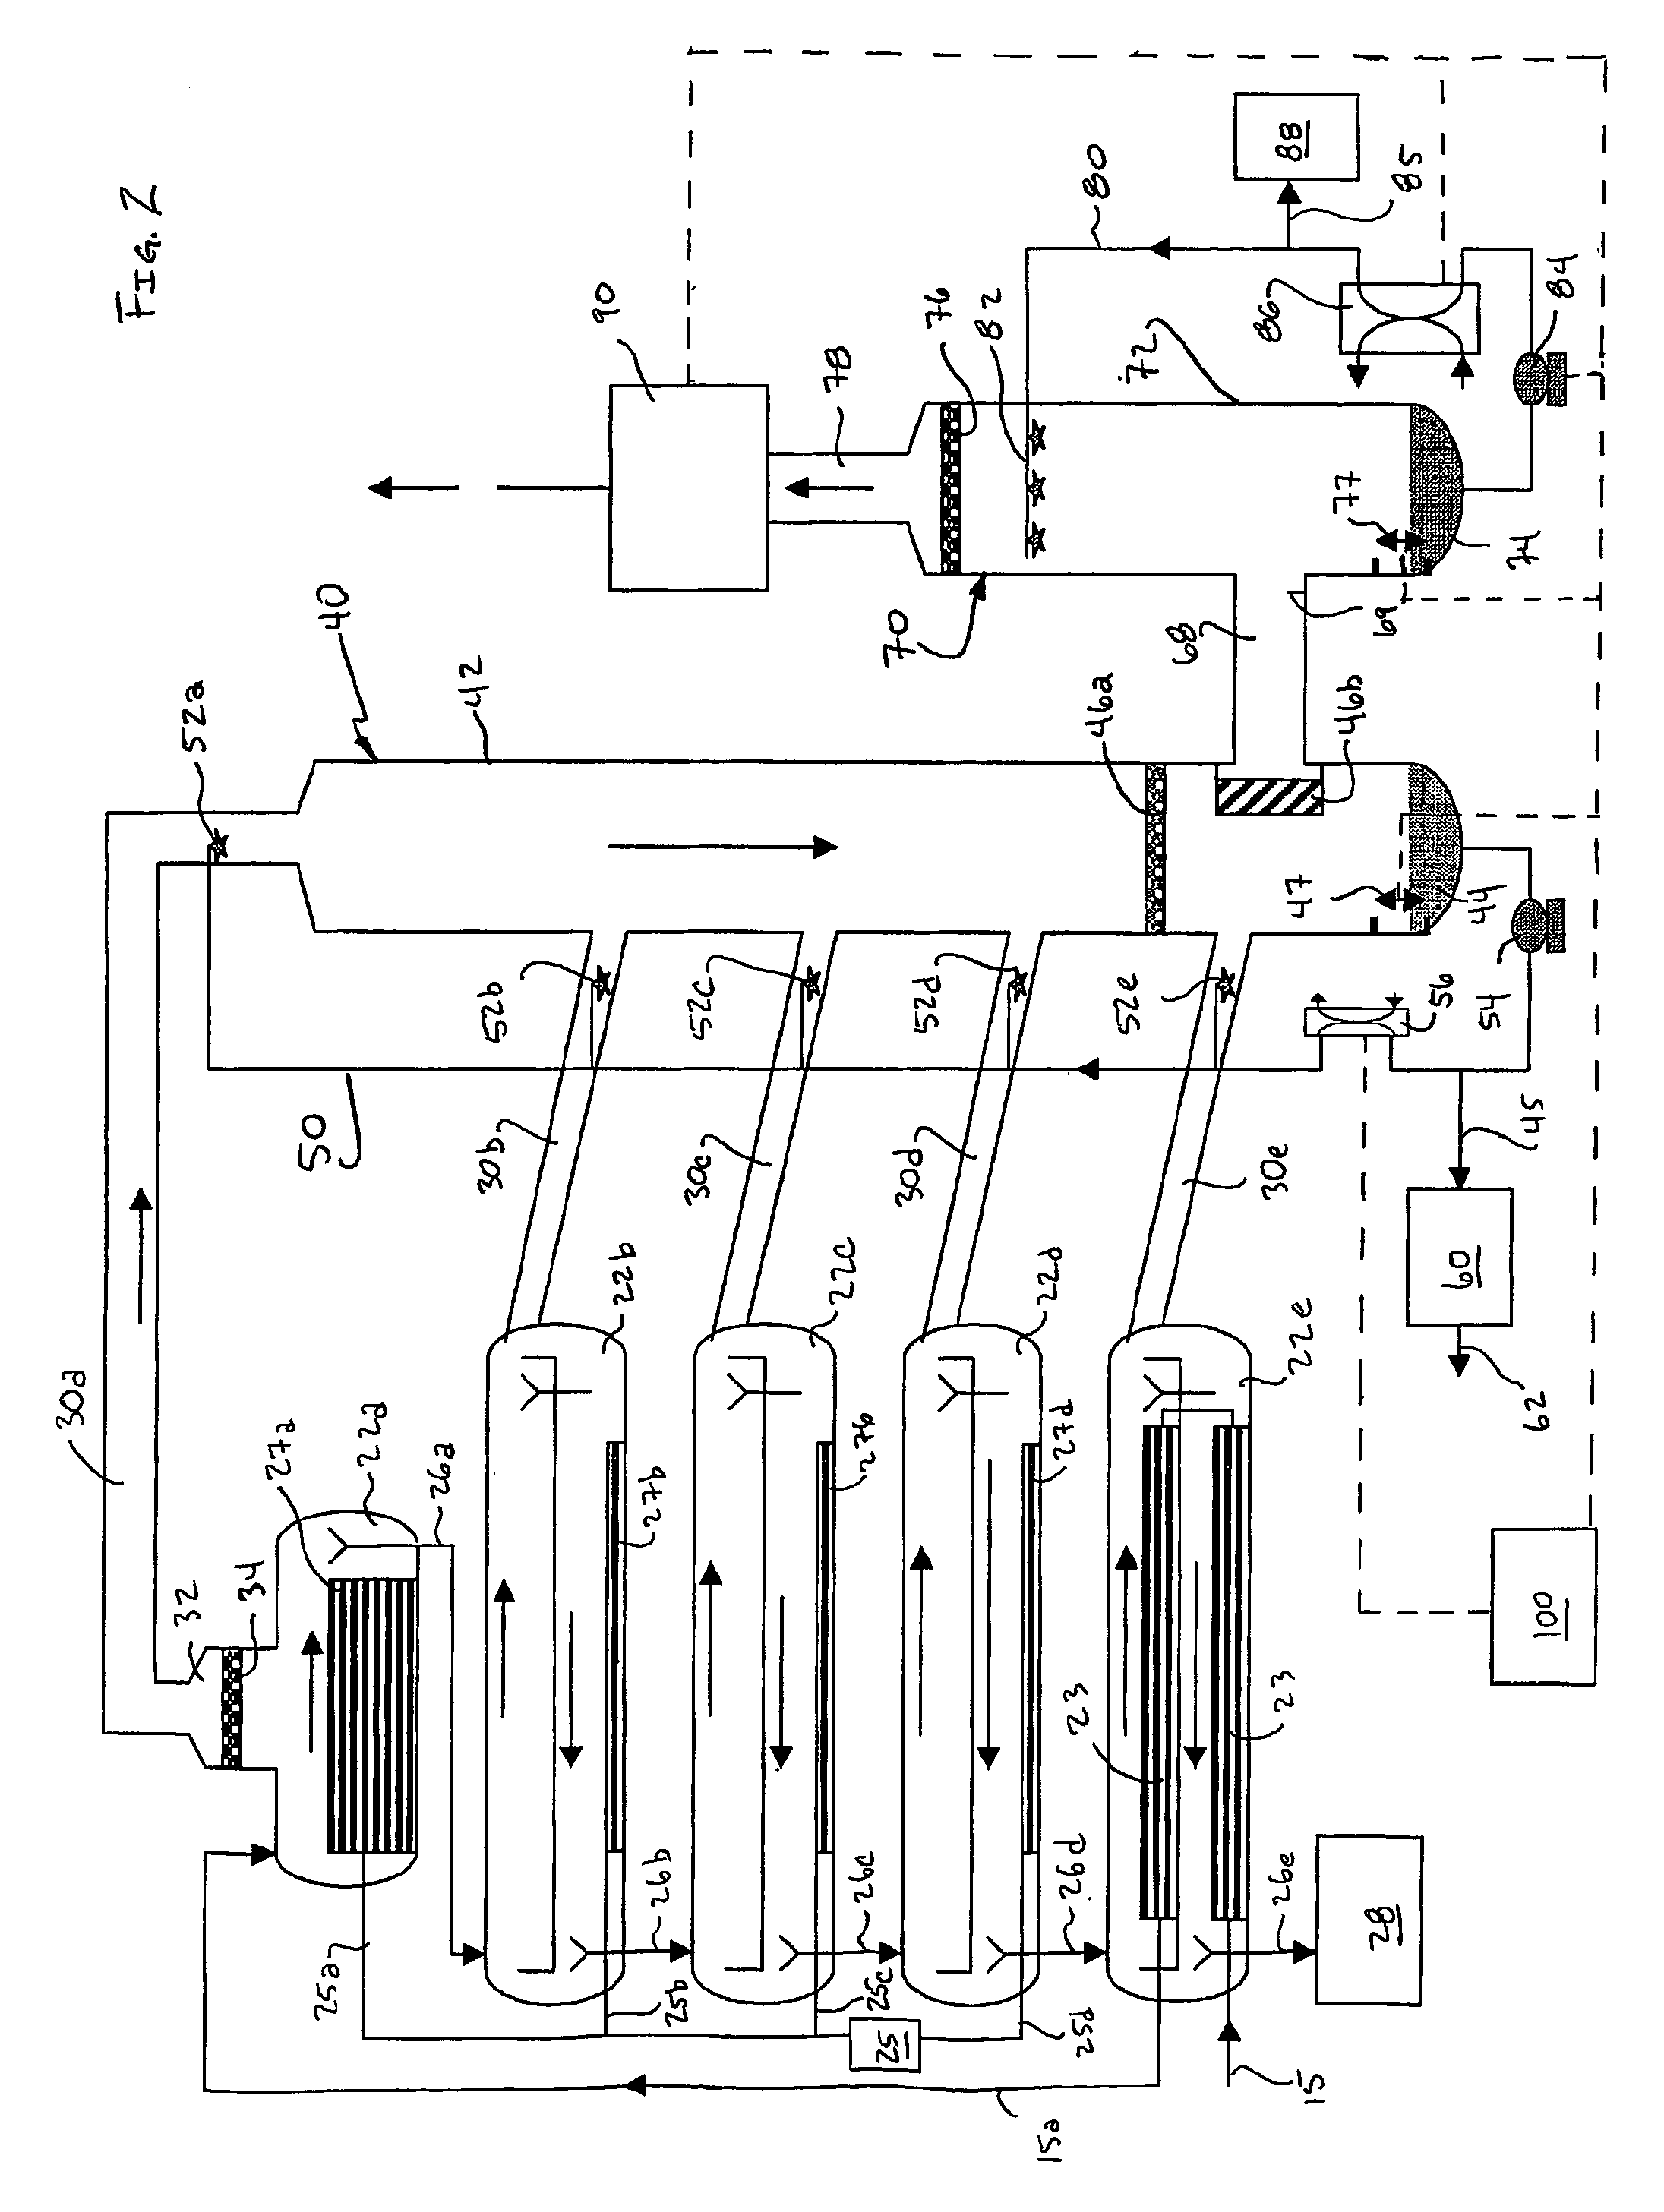 Method and apparatus for processing vegetable oils